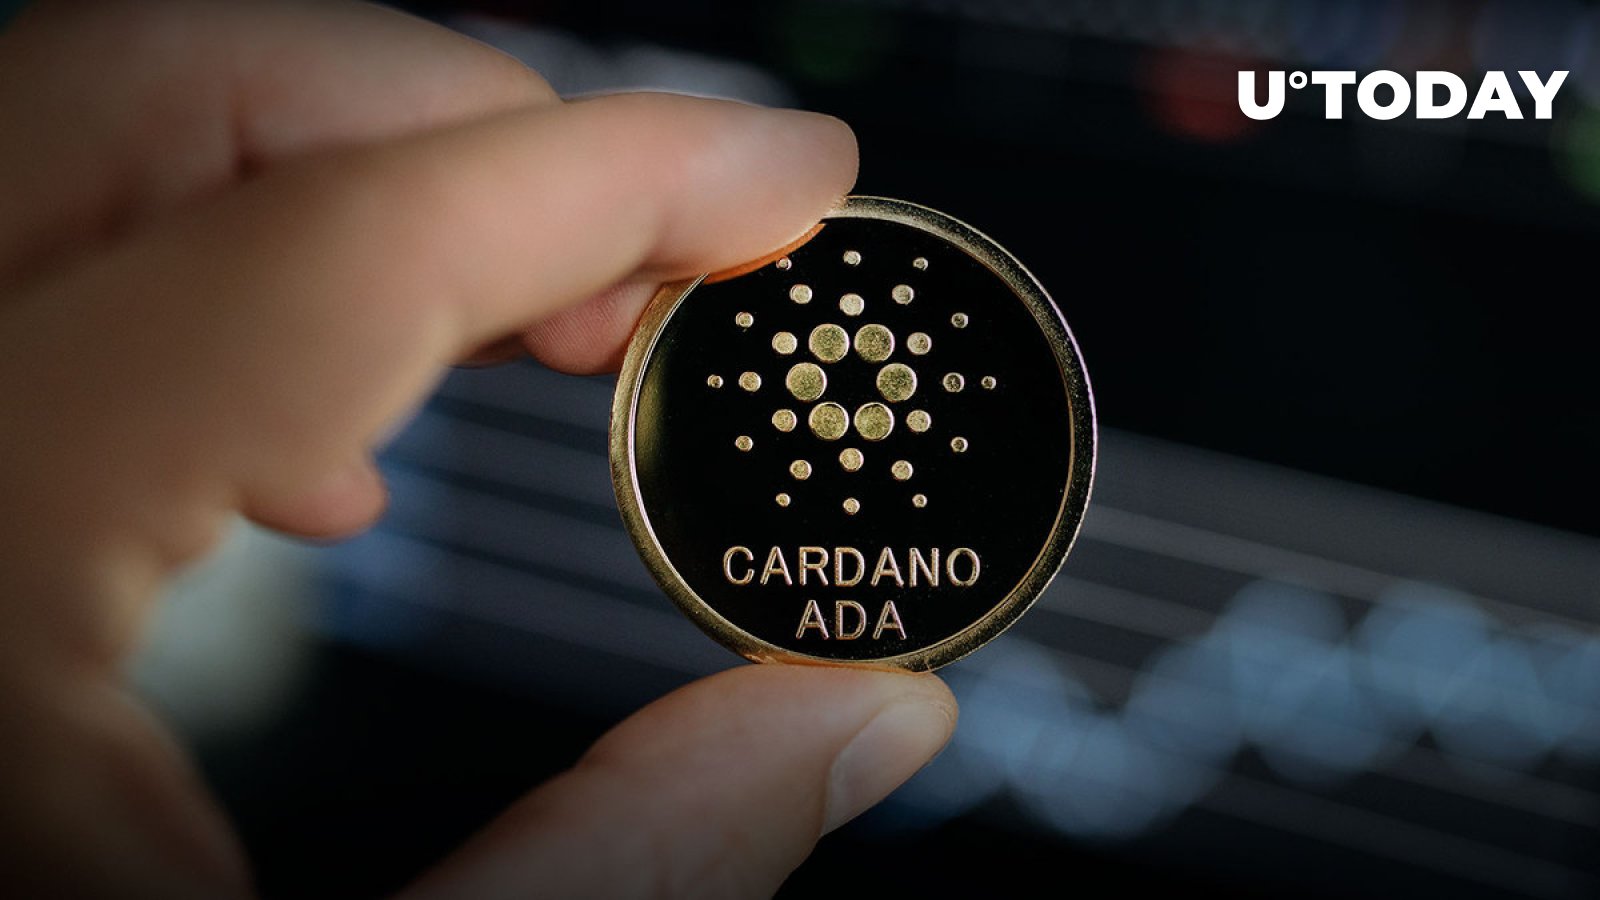 Cardano Vasil: Release of Latest Specification to Speed up Integration